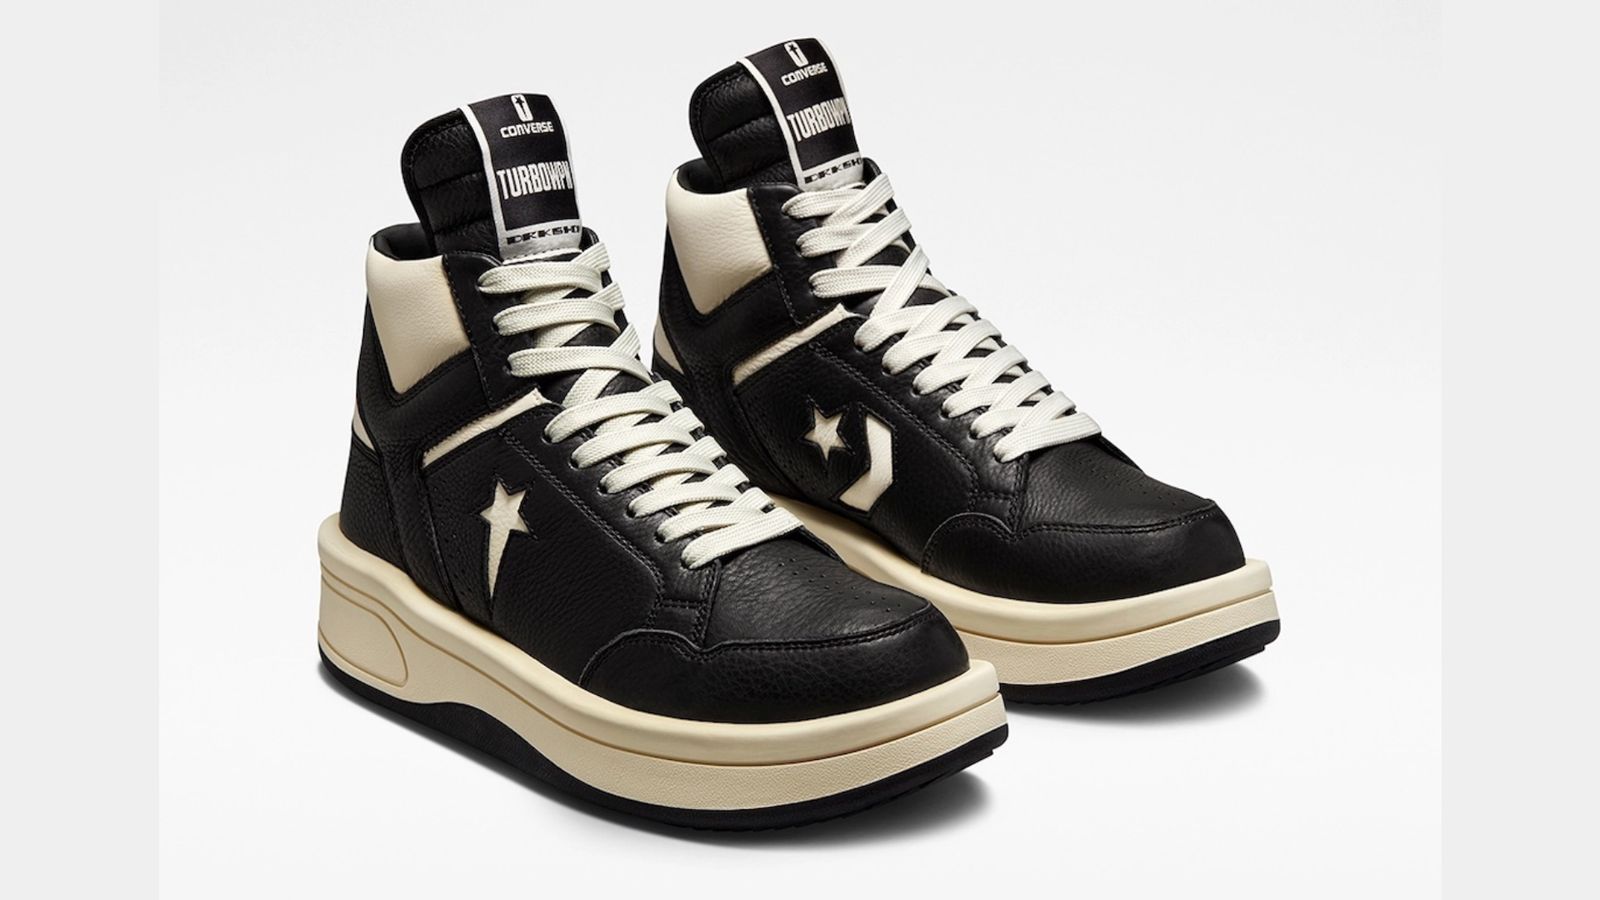 DRKSHDW Rick Owens x Converse TURBOWPN High "Black Cloud Cream" product image of a black and off-white leather pair of sneakers.